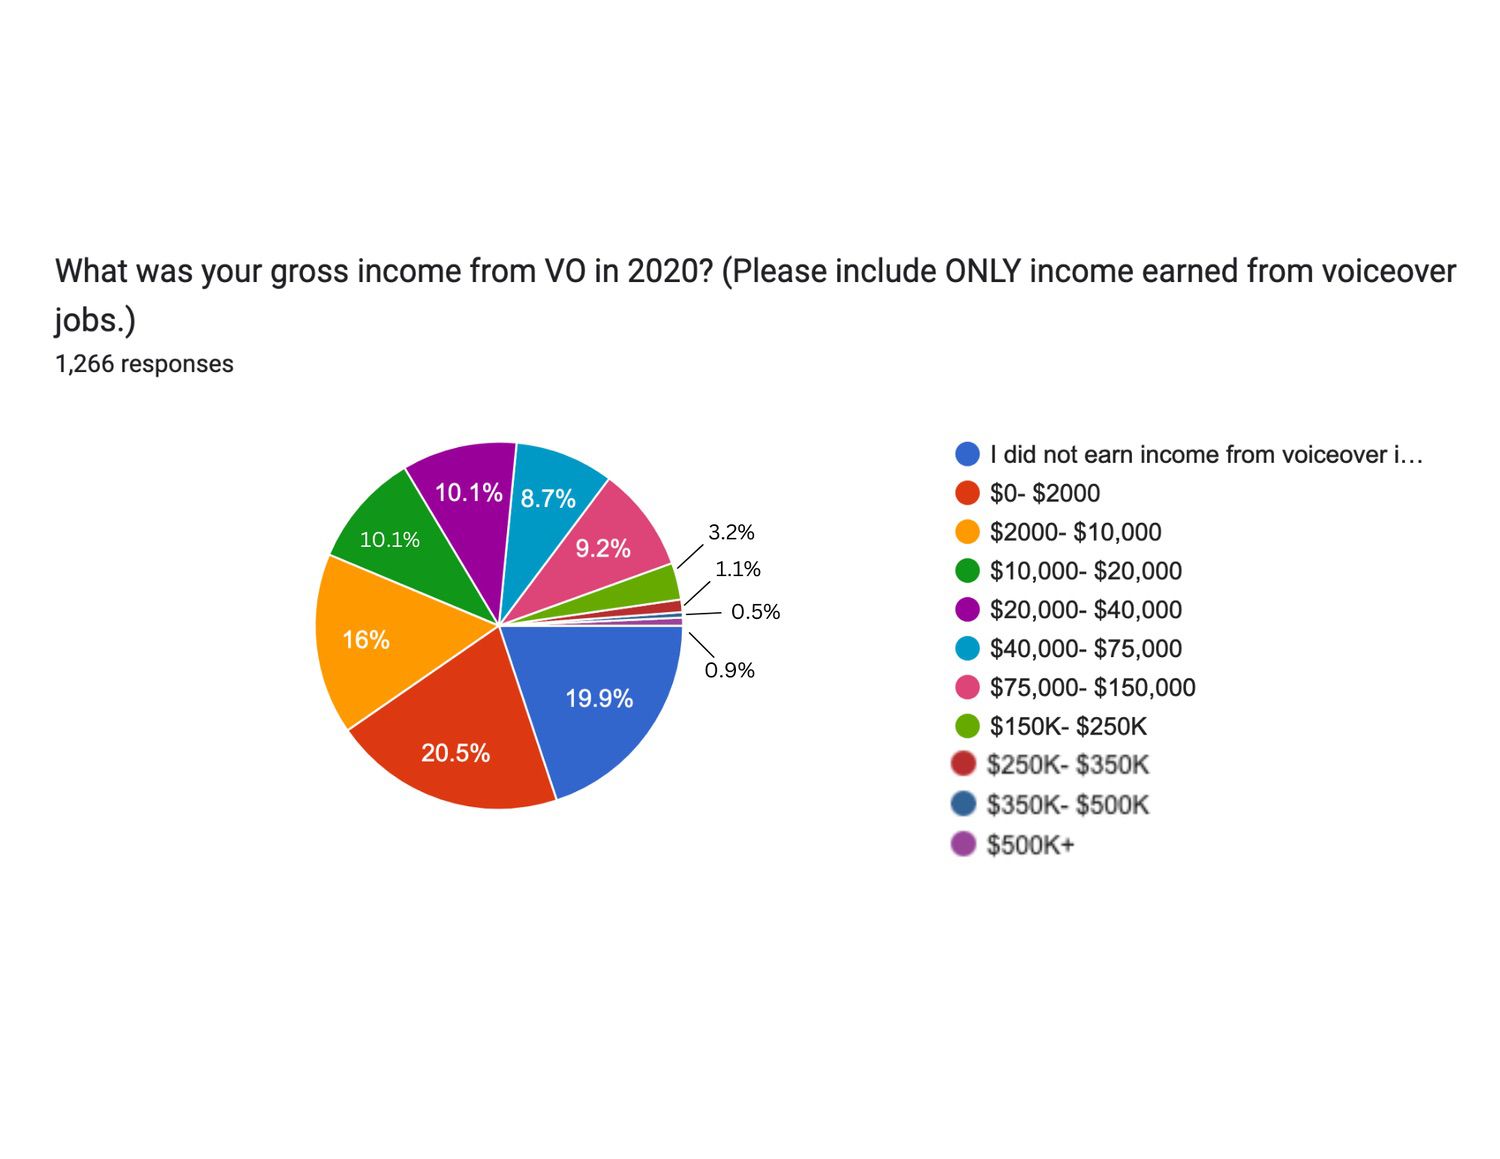 What was your gross income from VO in 2020?